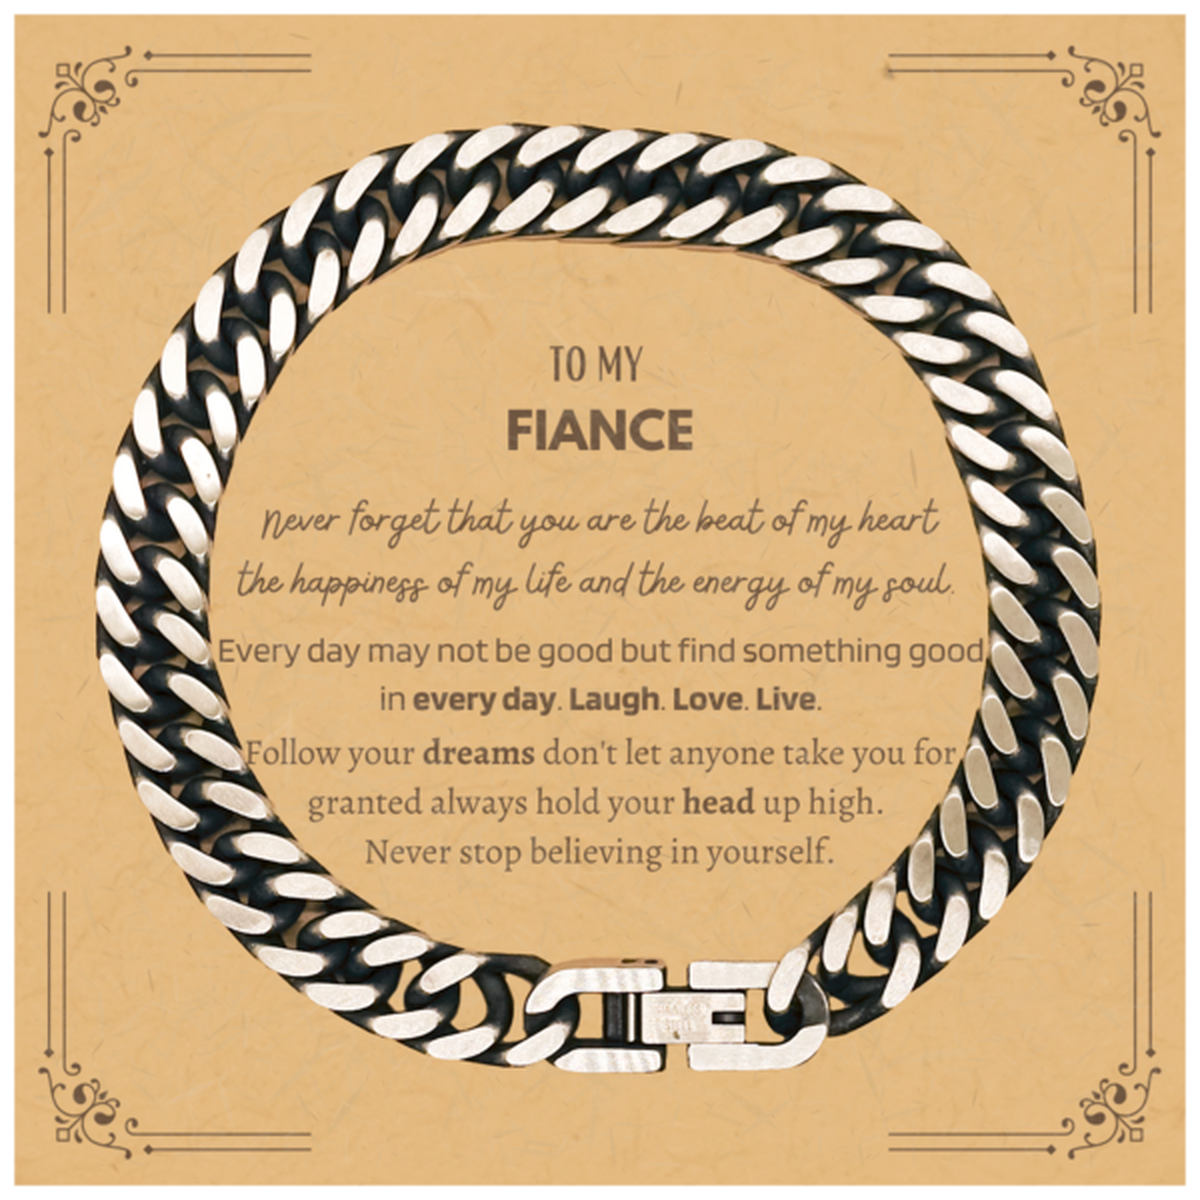 To My Fiance Message Card Gifts, Christmas Fiance Cuban Link Chain Bracelet Present, Birthday Unique Motivational For Fiance, To My Fiance Never forget that you are the beat of my heart the happiness of my life and the energy of my soul